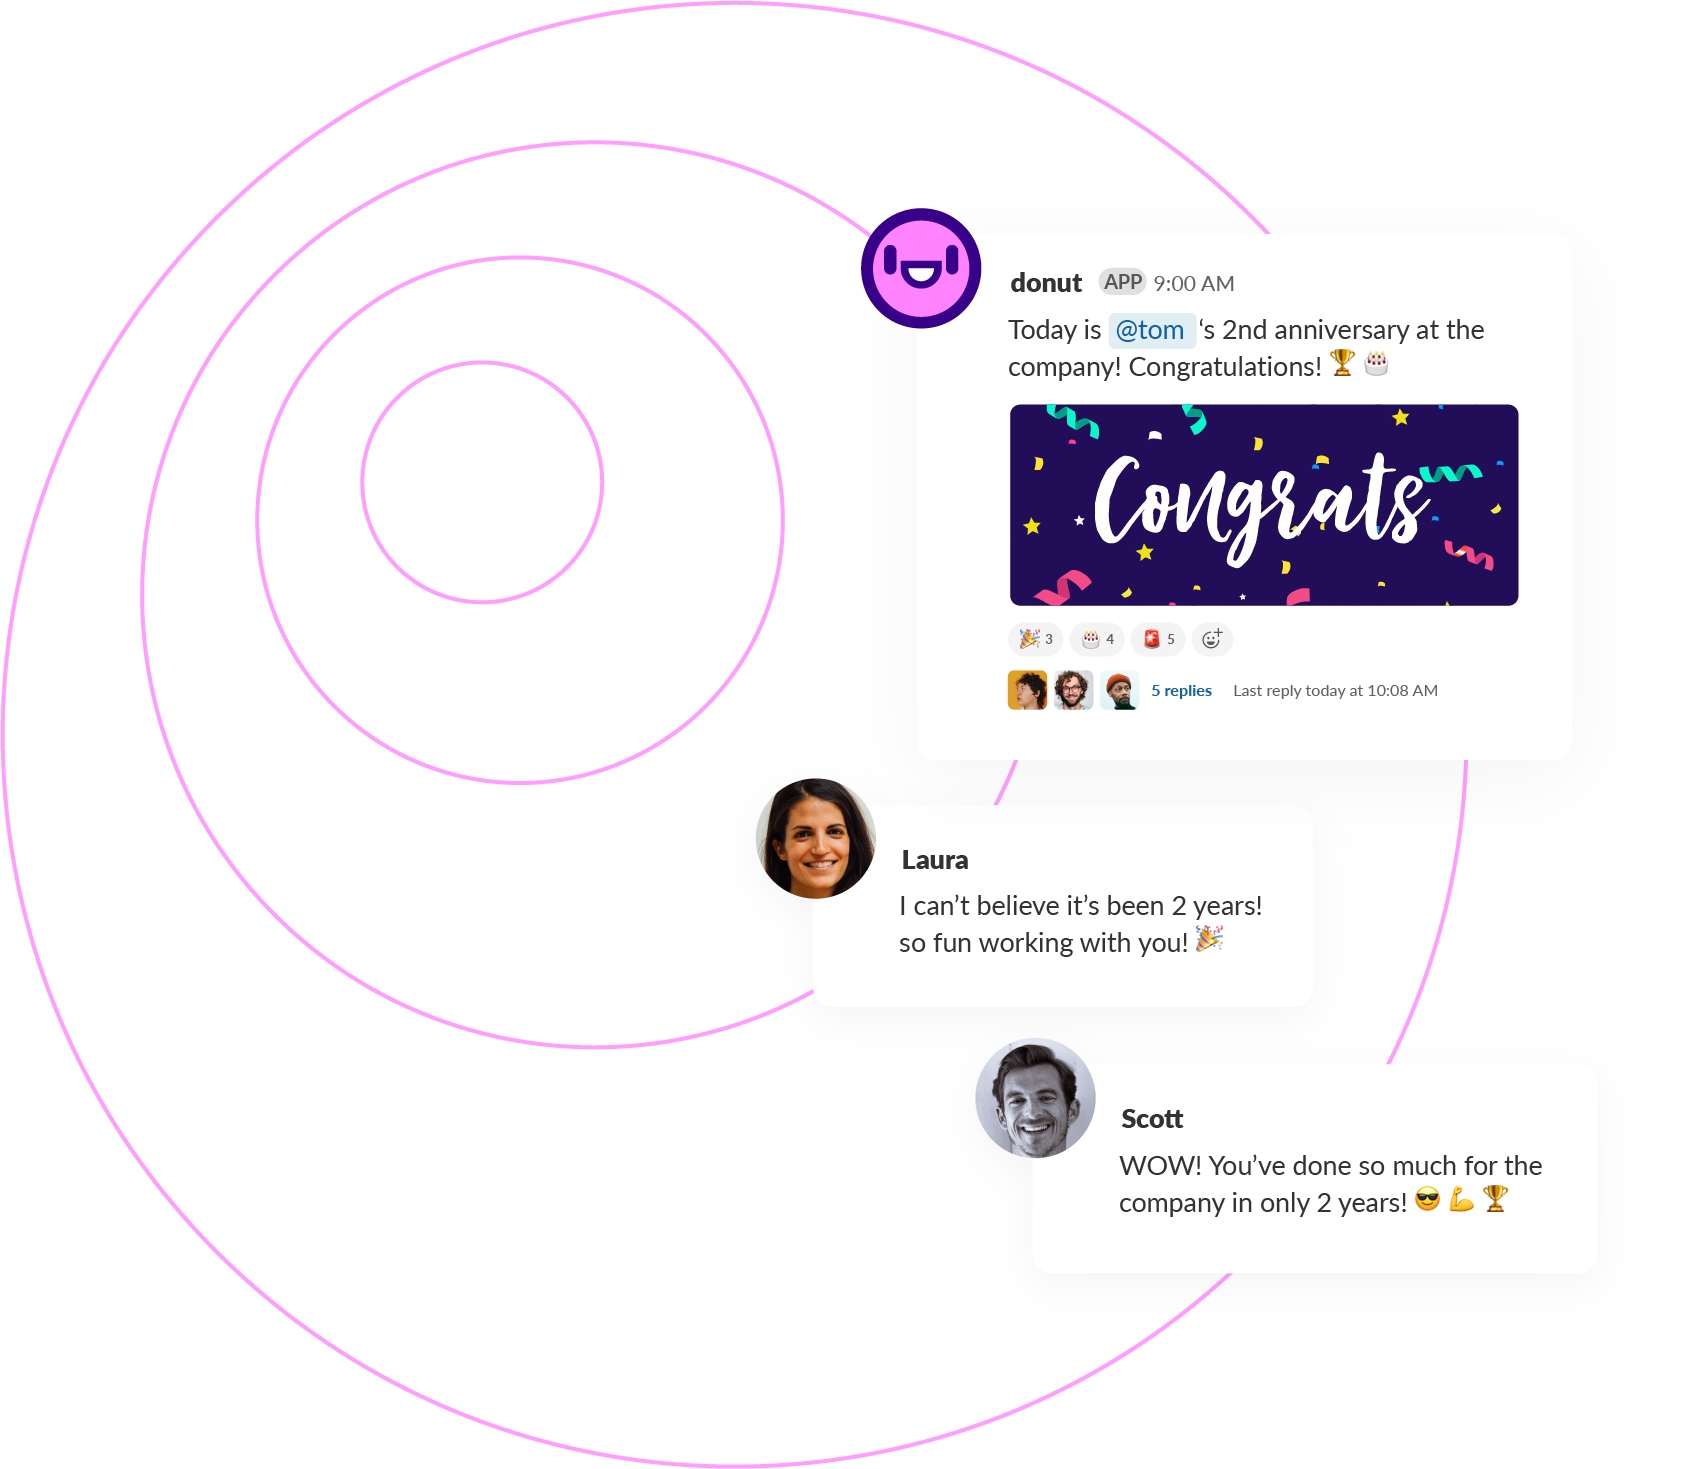 Screenshot of a Slack conversation. Message from 'donut APP' at 9:00 AM: 'Today is @tom's 2nd anniversary at the company! Congratulations!' Laura responds: 'I can't believe it's been 2 years! so fun working with you!' Scott adds: 'WOW! You've done so much for the company in only 2 years!